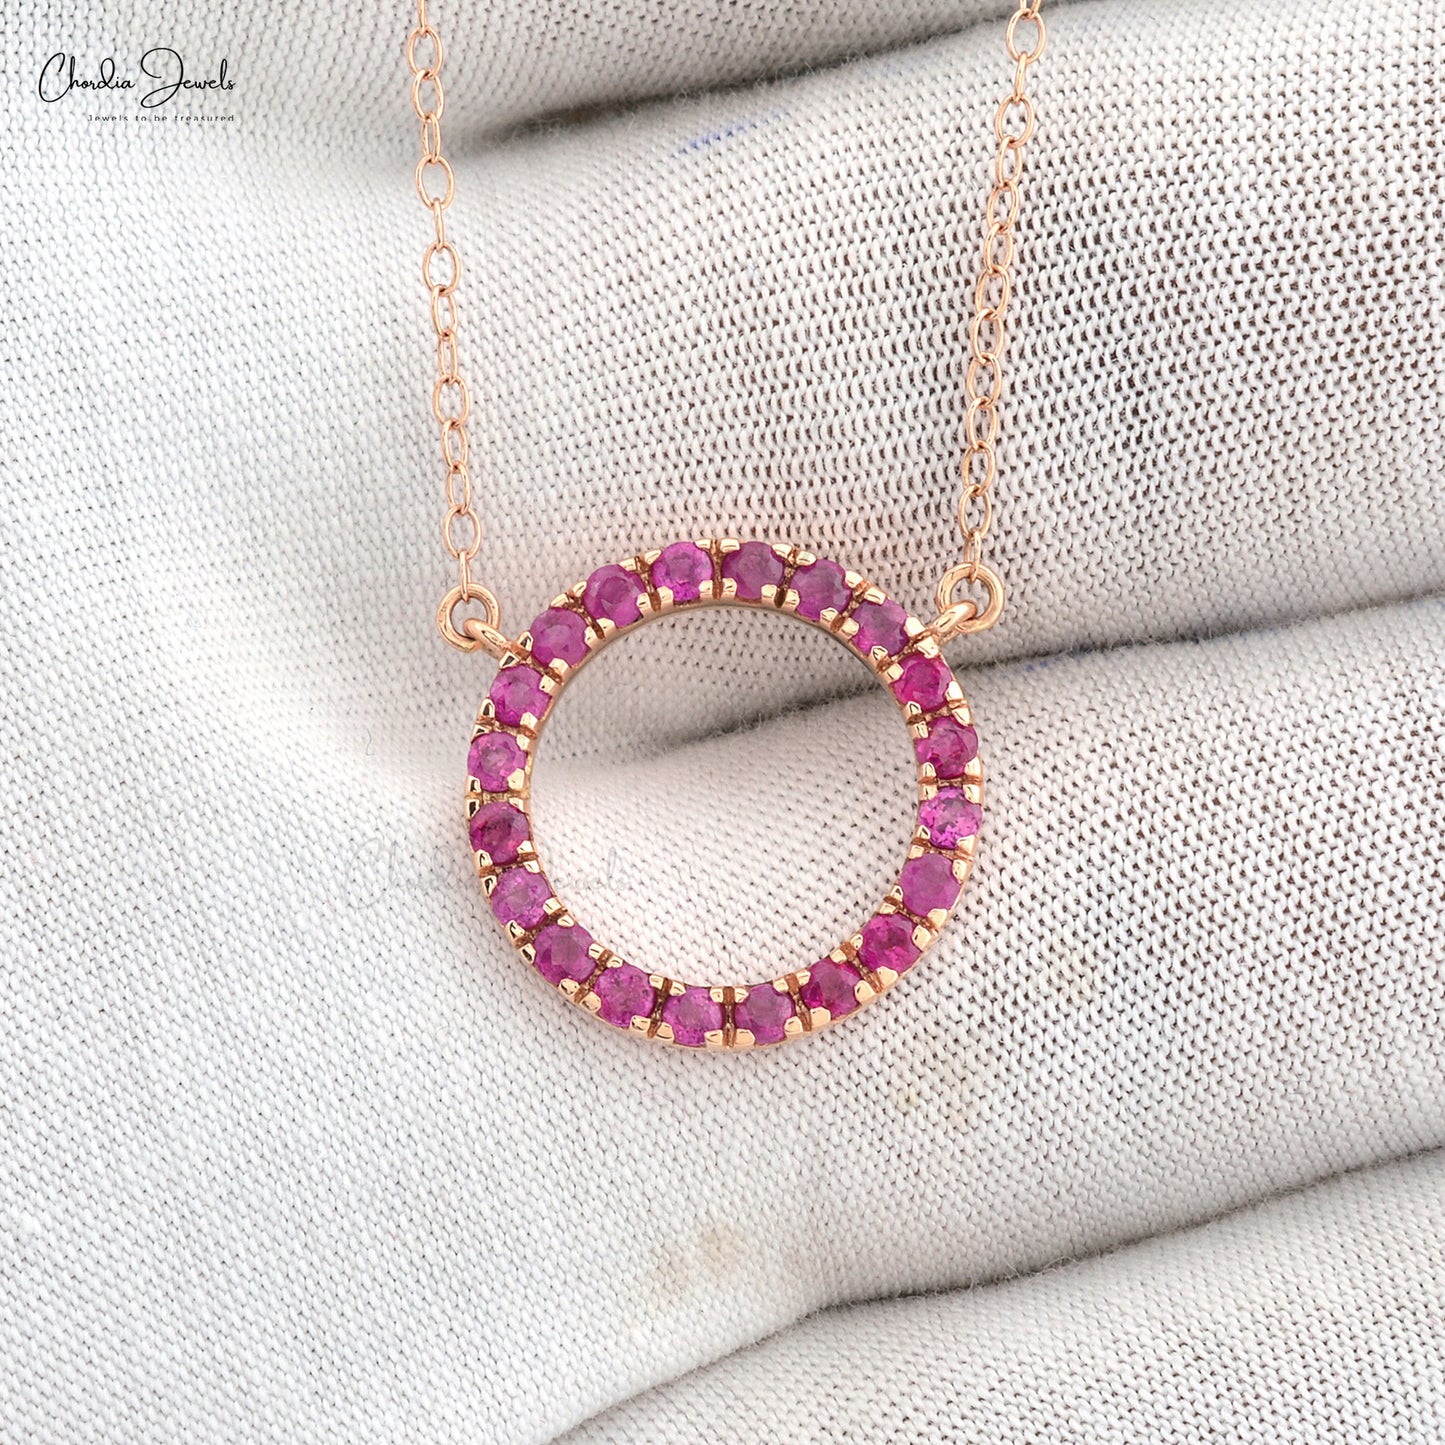 Custom Handmade Authentic 2mm Round Cut Ruby Circle Necklace Pendant Natural Red Gemstone Necklace in Pure 14k Rose Gold Gift For Her